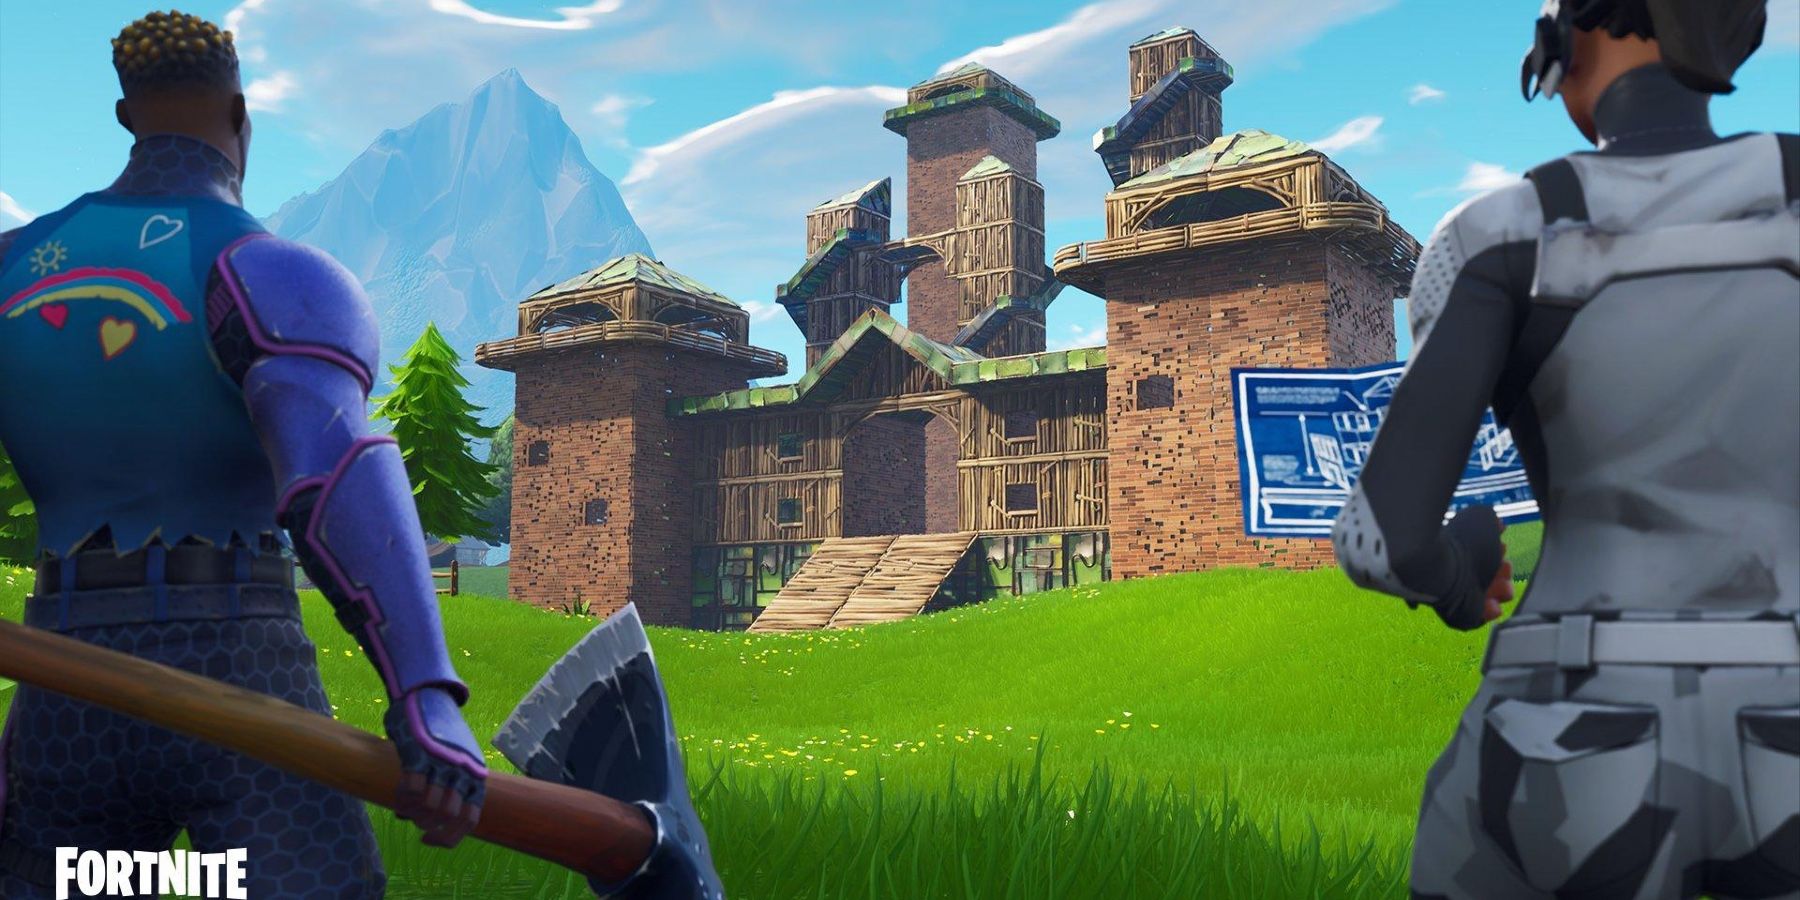 How Pro Fortnite Players Can Build So Fast